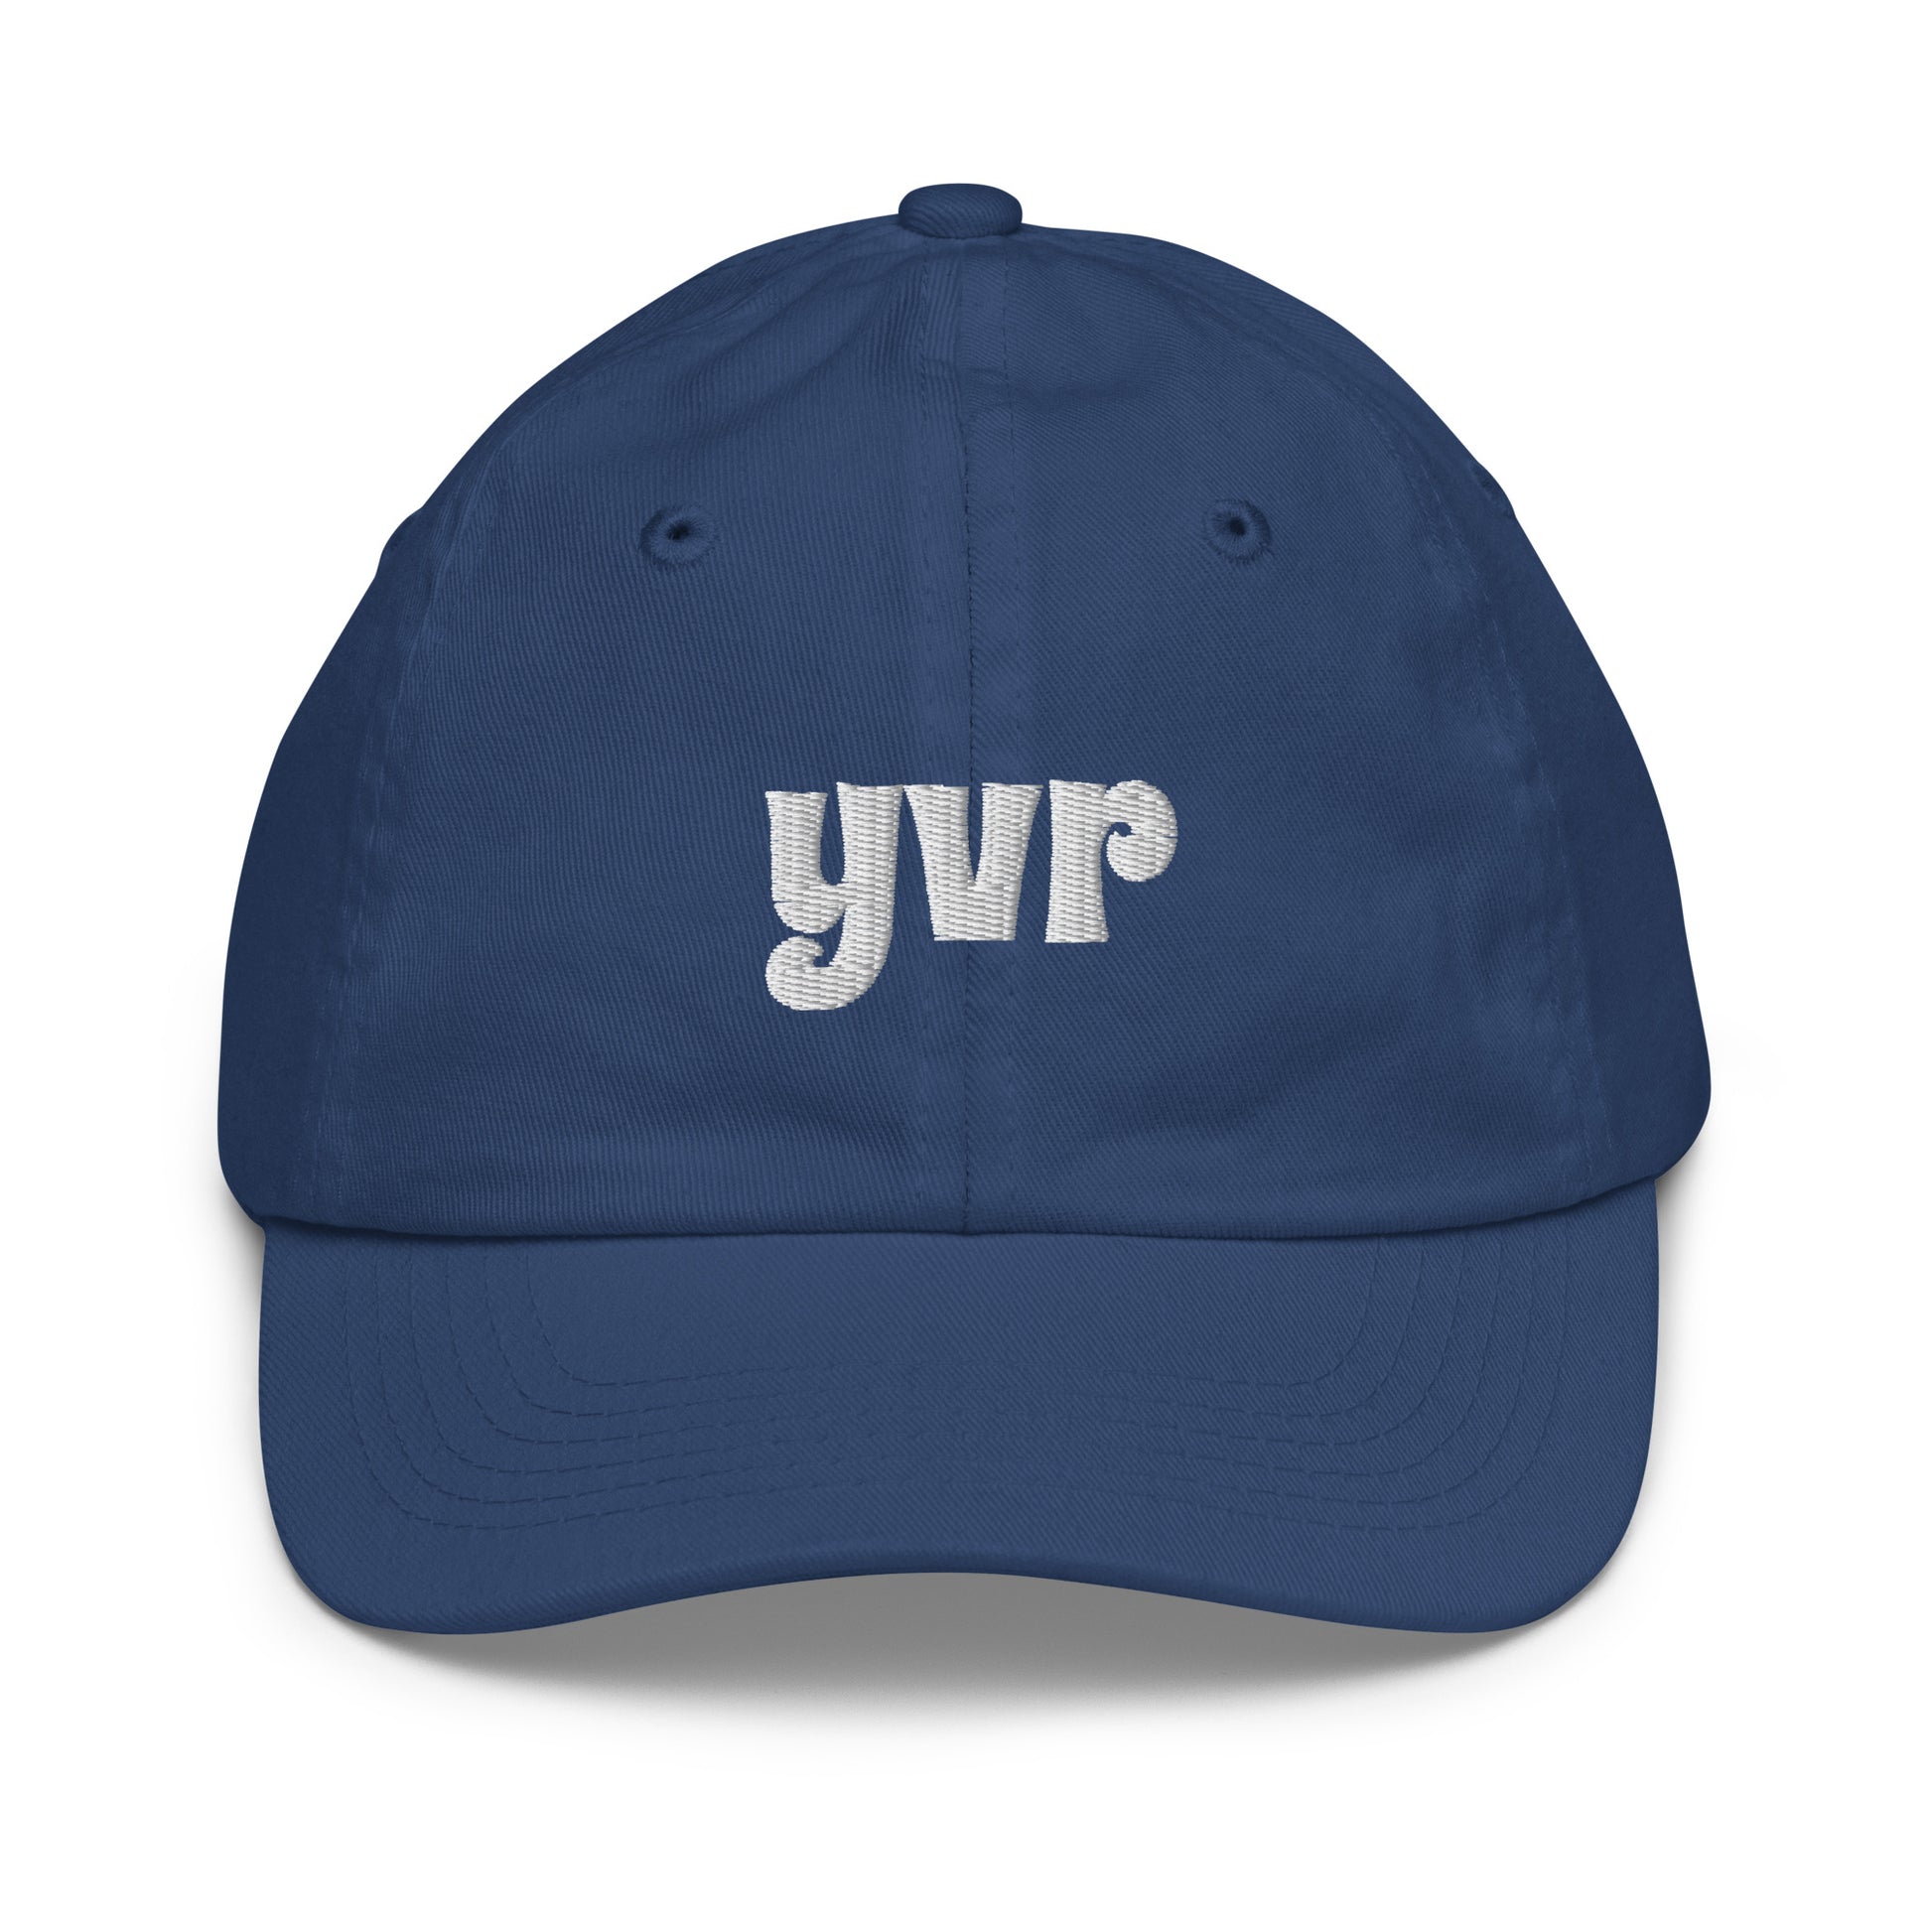 Groovy Kid's Baseball Cap - White • YVR Vancouver • YHM Designs - Image 15